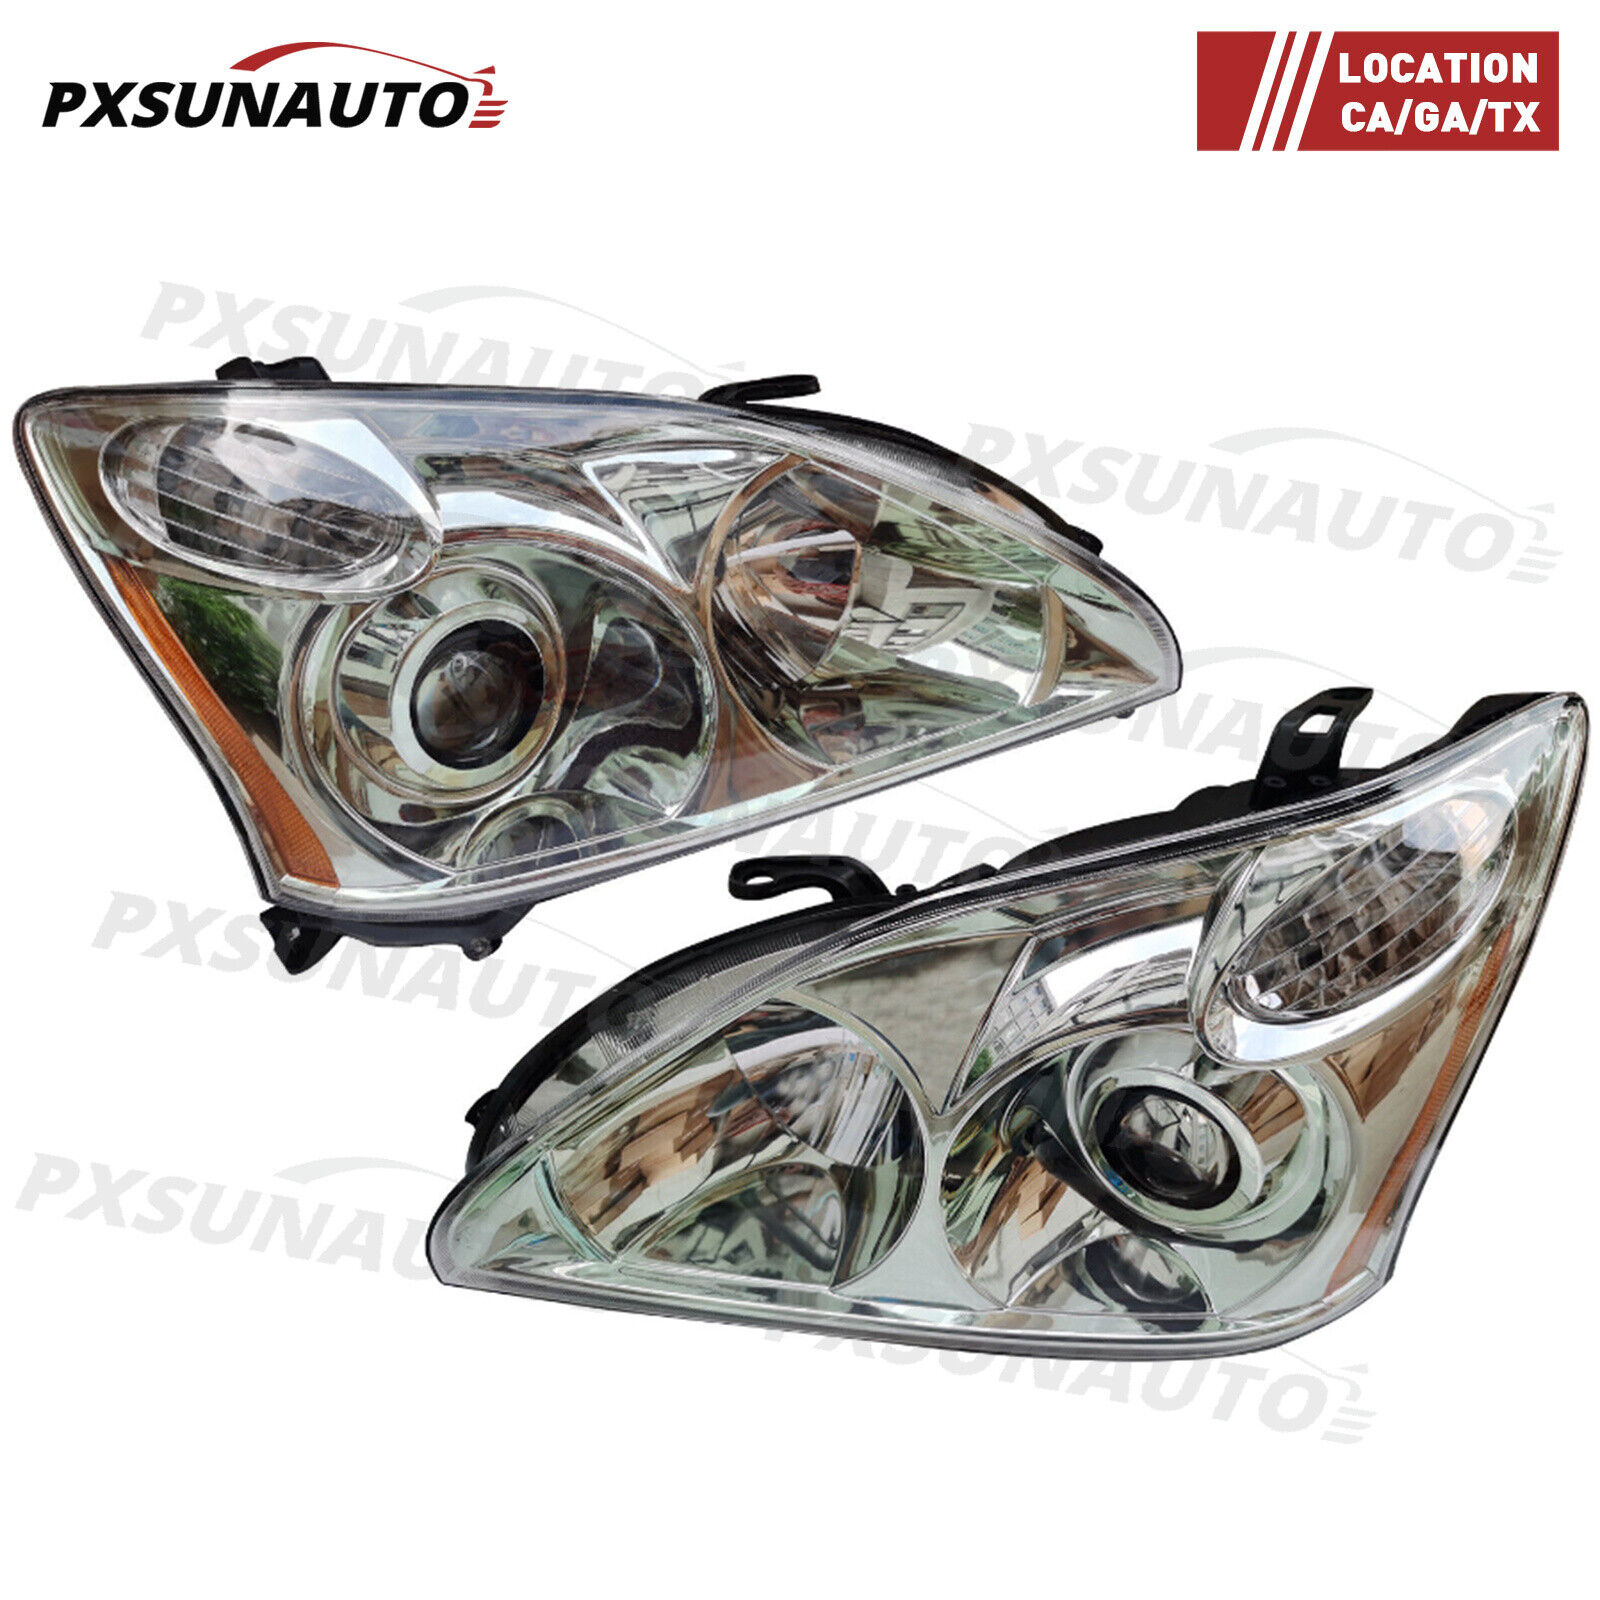 For 2004-2009 Lexus RX330 RX350 RX400h Headlights HeadLamps Left&Right Pair